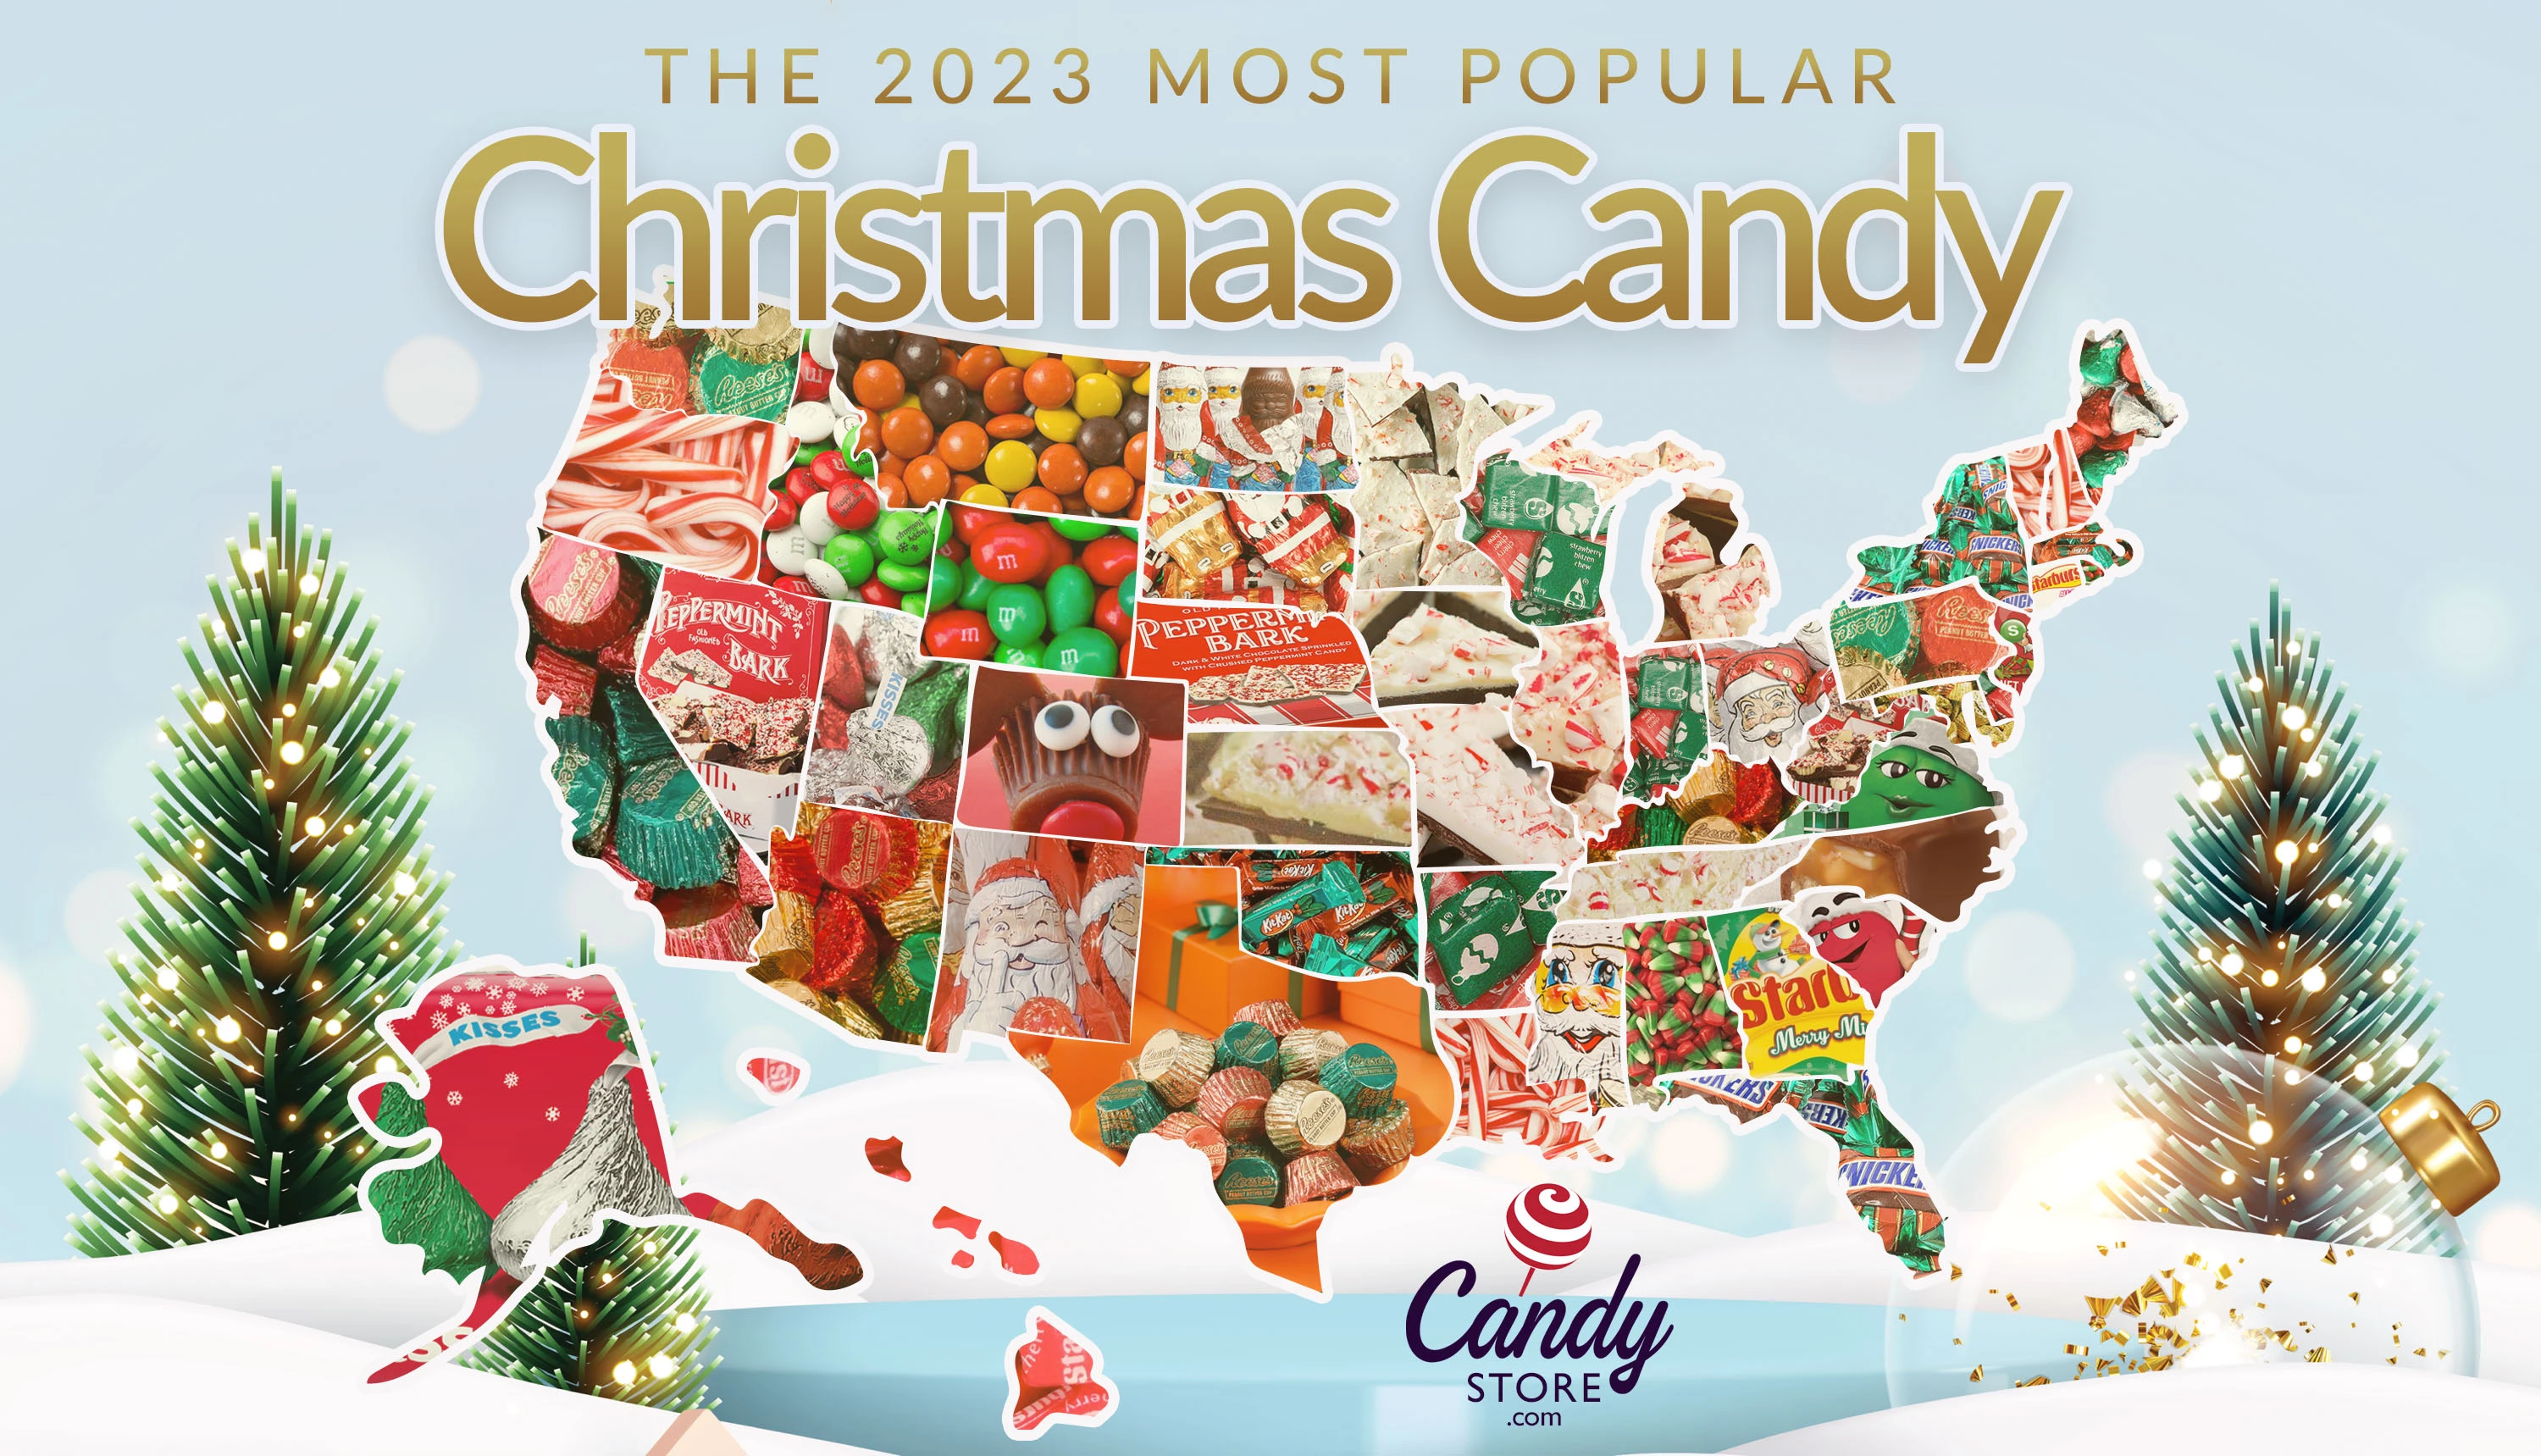 https://map.candystore.com/christmas/2023/img/download-christmas-map-2023-3000-004.webp